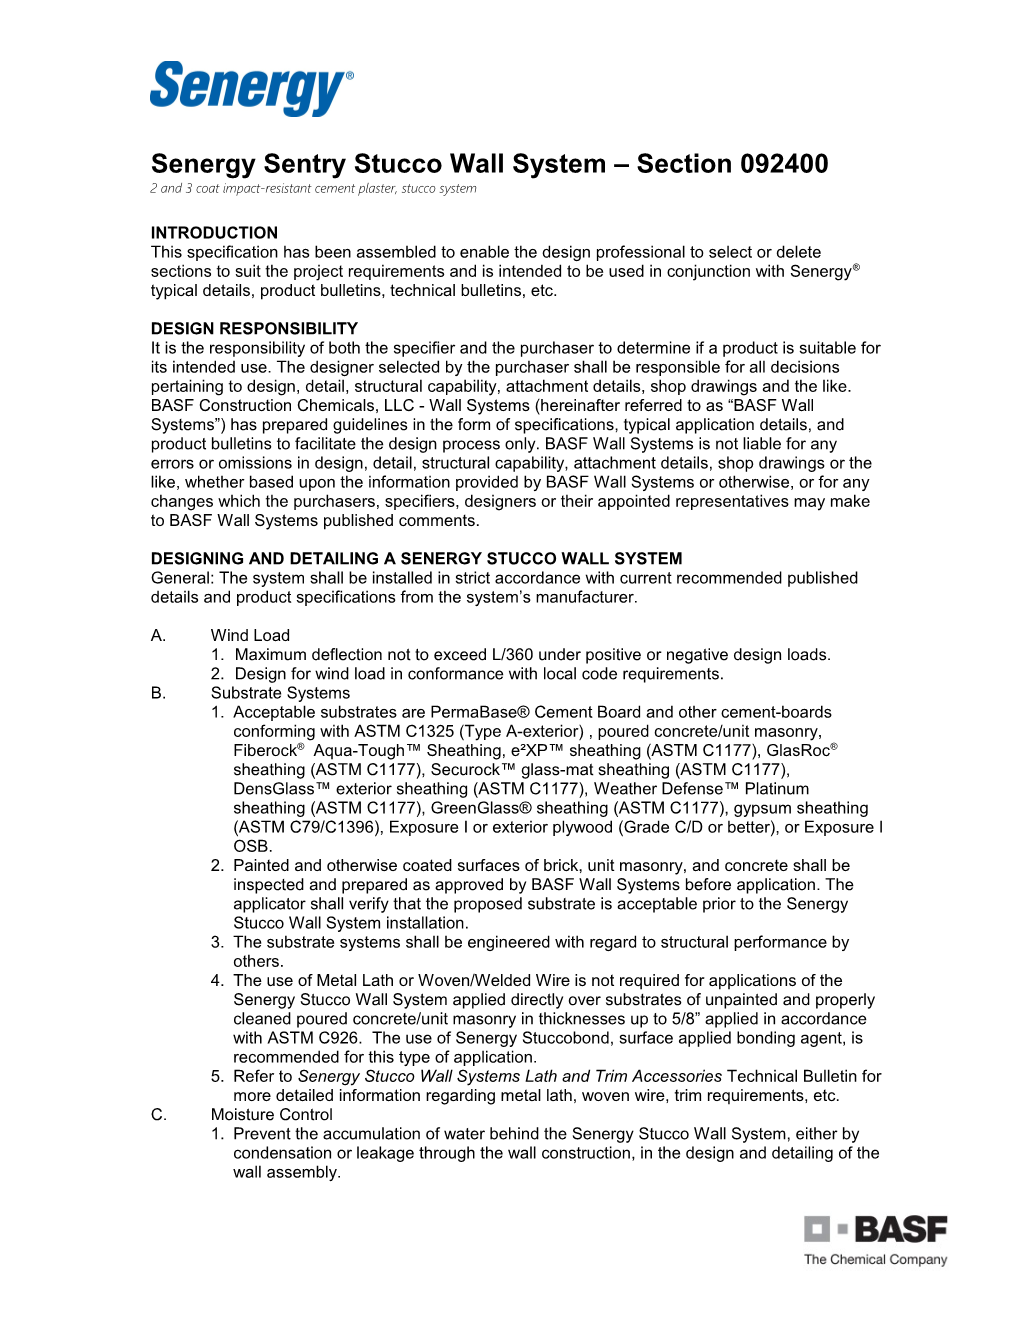 Senergy Sentry Stucco Wall System Section 092400